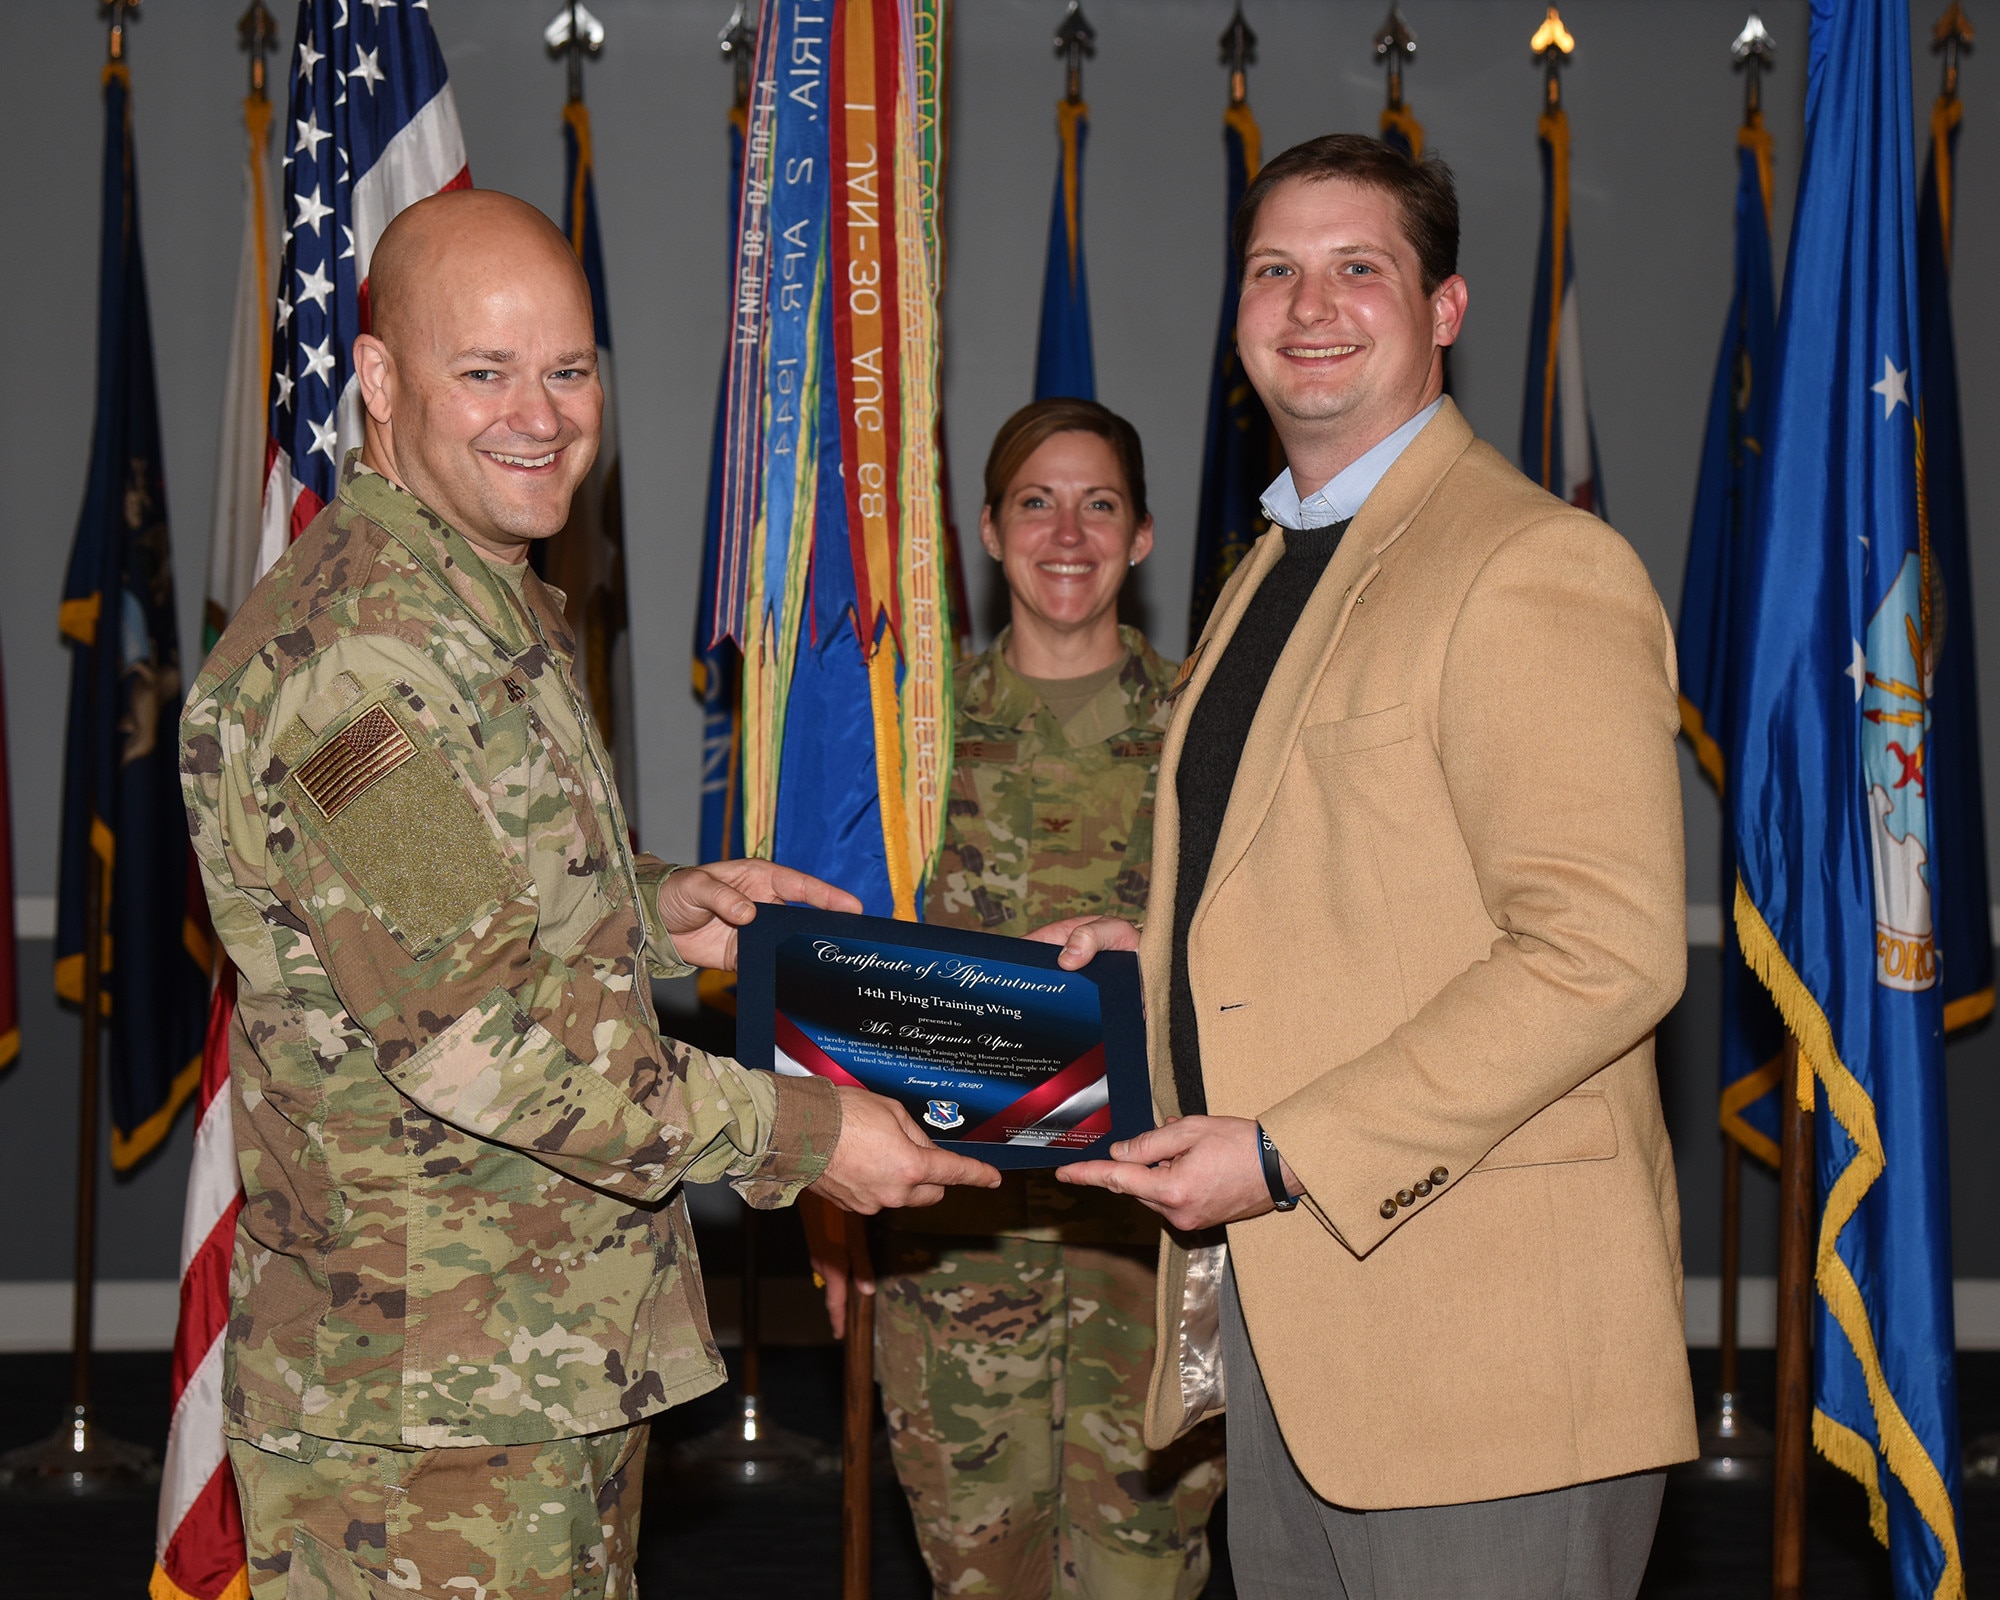 Col. Samantha Weeks (center), 14th Flying Training Wing commander, smiles as Chief Master Sgt. Trevor James (left), 14th FTW command chief, gives a certificate to an honorary commander inductee on Jan. 21, 2020, at Columbus Air Force Base, Miss. As honorary commanders, local leaders will be fully immersed in the Air Force culture and experience the wing’s mission of cultivating, creating pilots and connecting first hand. (U.S. Air Force photo by Elizabeth Owens)